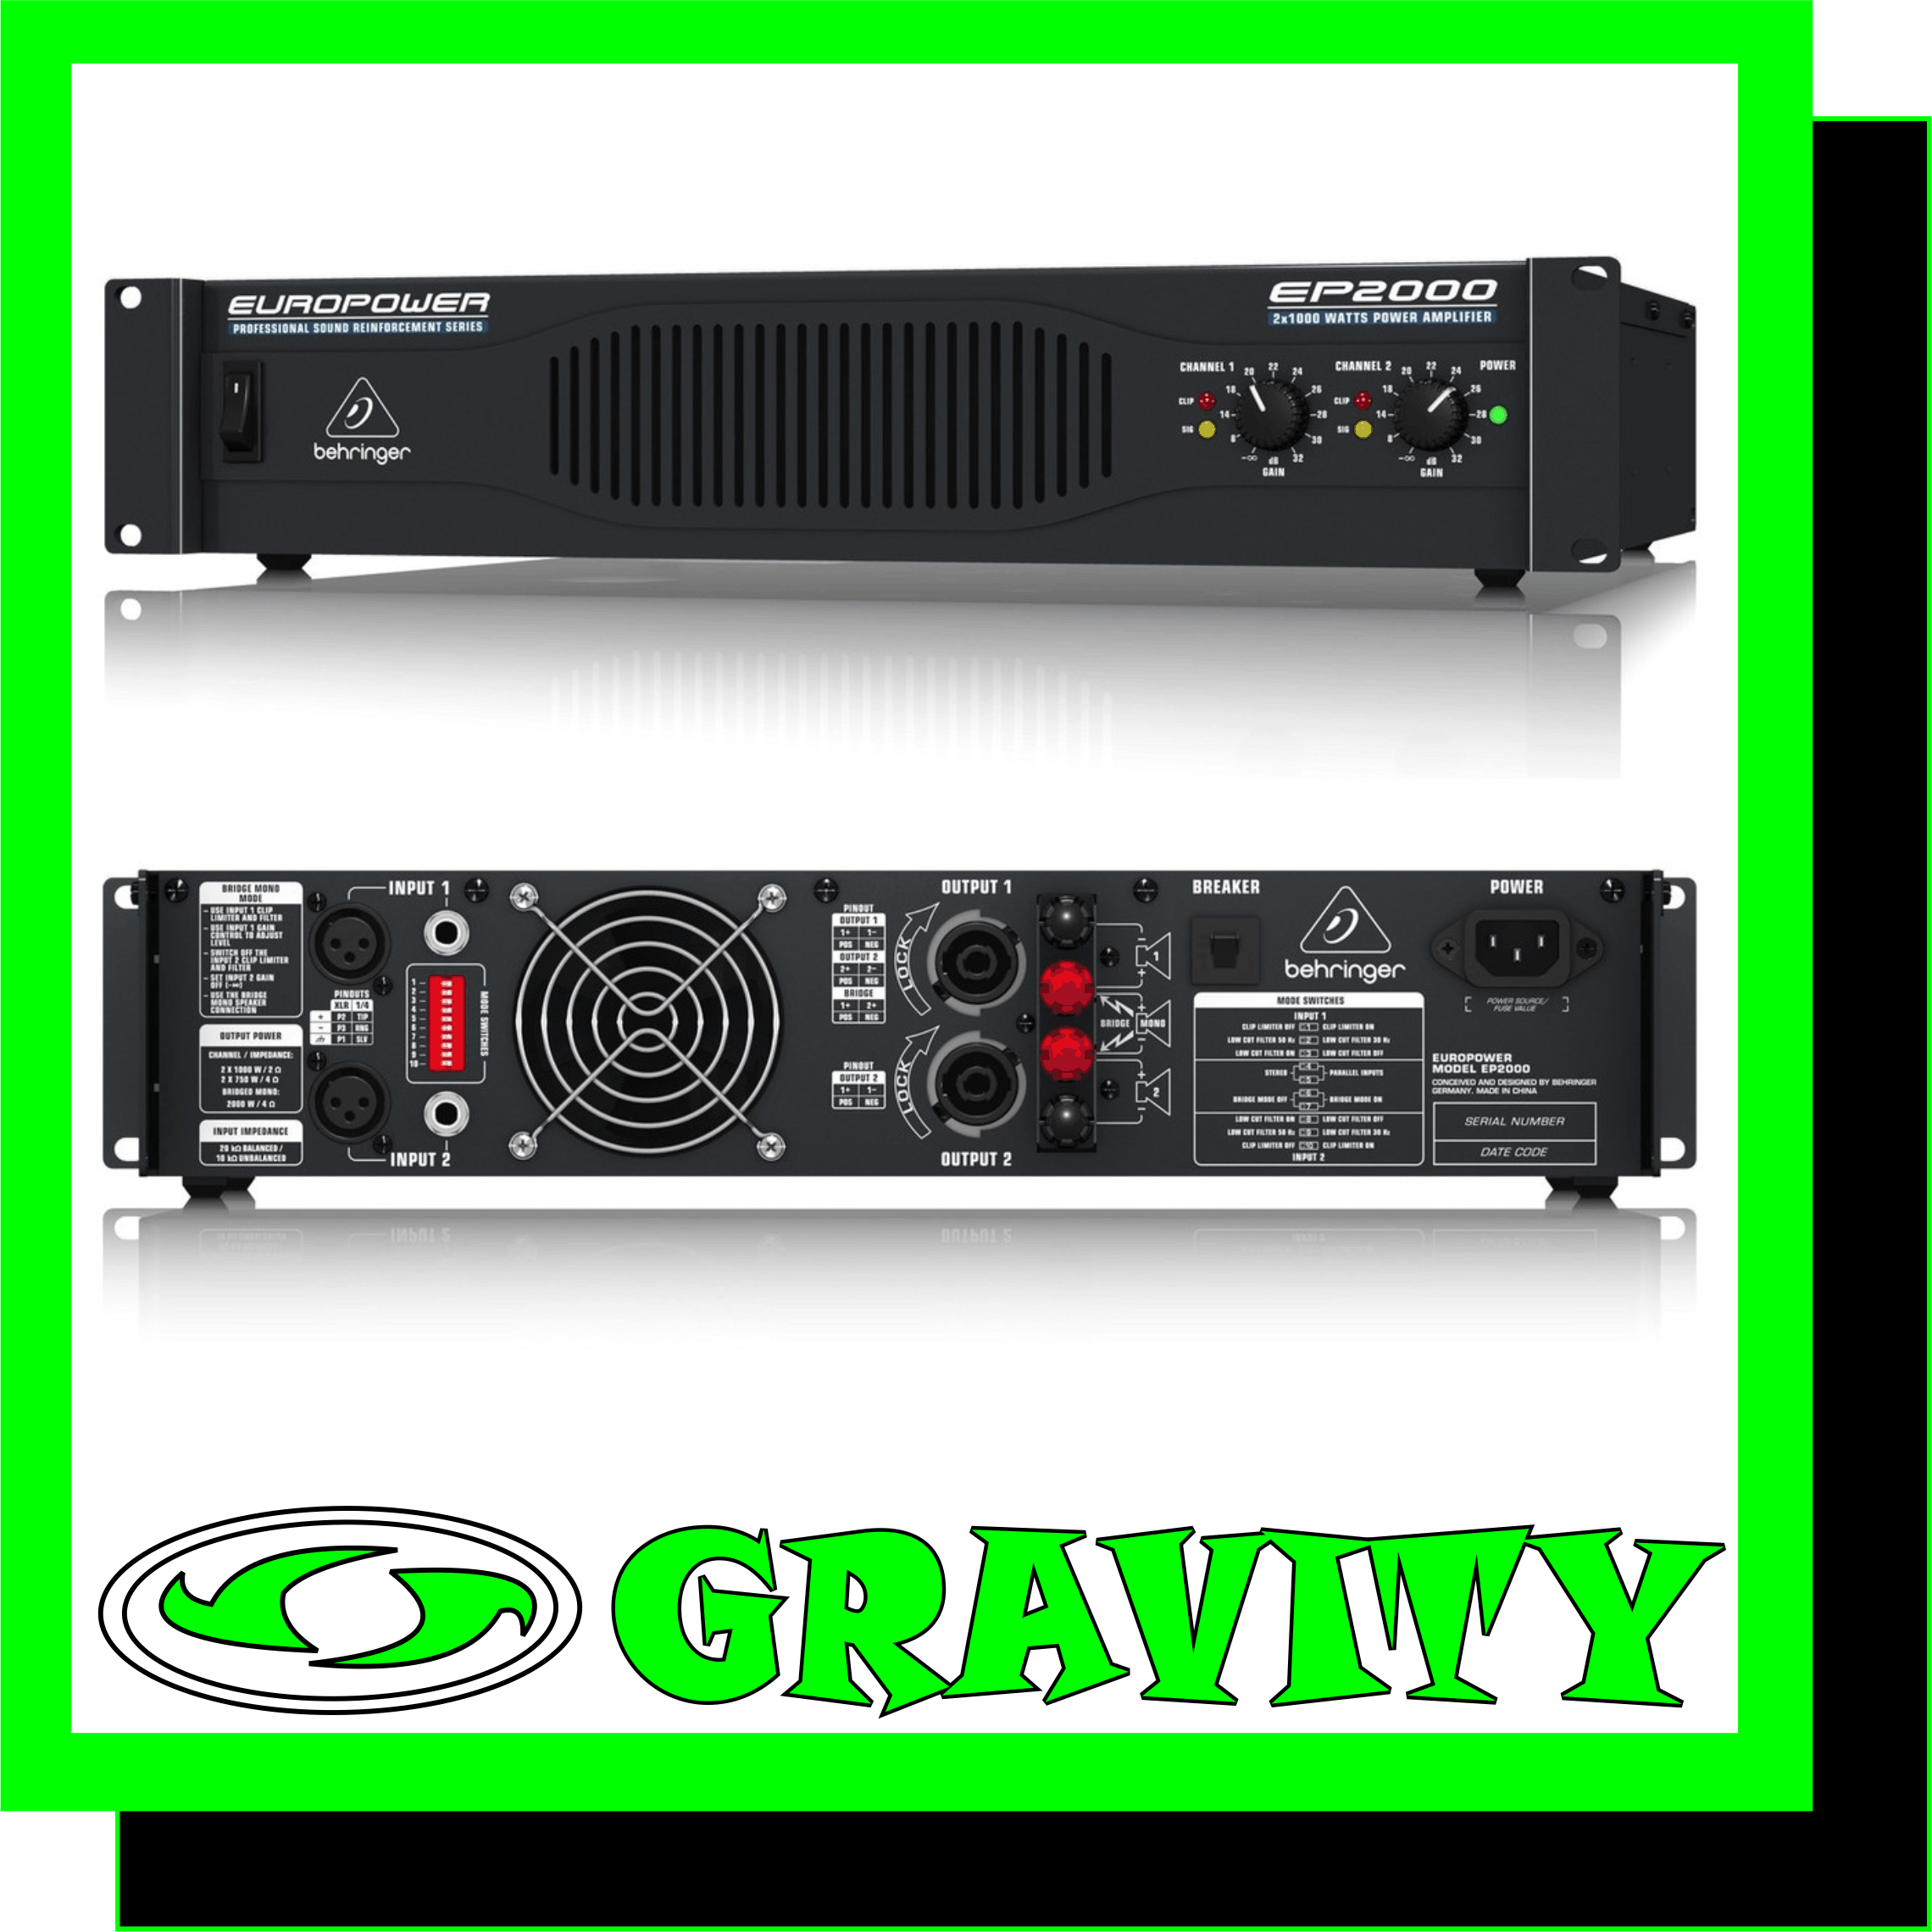 Product Features: -2 x 1,000 Watts into 2 Ohms; 2 x 750 Watts into 4 Ohms; 2,000 Watts into 4 Ohms (bridge mode) -ATR (Accelerated Transient Response) technology for ultimate punch and clarity -Switchable limiters offer maximum output level with reliable overload protection -Detented gain controls for precise setting and matching of sensitivity -Precise Power, Signal and Clip LEDs to monitor performance -XLR and 1/4? TRS input connectors for compatibility with any source -Professional speaker connectors and “touch-proof” binding posts support most speaker wiring systems -Selectable low-frequency filters remove damaging infra-sound frequencies -Independent DC and thermal overload protection on each channel automatically protects amplifier and speakers -High-current toroidal transformer for ultra-high transient response and absolute reliability -“Back-to-front” ventilation system including air filter for reliable operation -“Built-like-a-tank,” impact-resistant, all-steel 2U rackmount chassis -High-quality components and exceptionally rugged construction ensure long life -Conceived and designed by BEHRINGER Germany  EUROPOWER EP2000 Professional 2,000-Watt Stereo Power Amplifier with ATR (Accelerated Transient Response) Technology The EP2000 and EP4000 represent everything musicians love about our popular EP1500 and EP2500—excellent sound quality, road-worthy toughness and reliability, low-noise operation and incredible power. With 2,000 and 4,000-Watts respectively, the EP2000 and EP4000 amplifiers are perfect amplifiers for medium-sized club gigs, mobile PA systems, church services or public spaces.  Everything you need, nothing you don’t The über-simple front panel controls of these amps give you all of your sound’s vital signs at a glance. After flipping the Main switch, the Power LED will light when the amp is ready for action. Both channels have independent gain dials as well as Clip LEDs that indicate when the signal is distorted and you need to reduce the gain. There are also Signal LEDs that light up when a signal is present at the input.  Panel discussion A panel of switches found on the back panel offers an array of cool options to apply to both channels of the EP2000 and EP4000. The Clip Limiter lets you get even more out of the amplifier without overdriving either it or your speaker system. Built-in circuitry automatically senses when the EP2000 or EP4000 is being overdriven into “clipping” and then momentarily reduces the input level to avoid clipping distortion. Since this all happens in just a few thousandths of a second, it’s the ideal way to avoid audible clipping distortion. Rickety stage vibrations, mic thumps and wind noise can cause ultra-low frequency sounds, or infrasonics. While technically inaudible, they can cause a huge drain on amp power, potential damage to your speakers and a sludgy sound in the audible bass ranges. Both EP models feature a defeatable Low Cut Filter that chops off unwanted frequencies below 50 Hz or 30 Hz (depending on your PA system’s capabilities). The same panel contains the switches that put these amps to work in either Stereo or Bridge (mono) mode. Both the EP2000 and EP4000 can be linked to additional power amps by switching into Parallel mode.  These Amps Have Guts There are plenty of awesome features on the outside of the EP2000 and EP4000, but there’s also a team of cool components on the inside helping it work its magic. They come loaded with famously reliable Toshiba/Fairchild power transistors, as well as a high-current toroidal transformer for ultra-high transient response and further reliability. Independent DC and thermal overload protection on each channel automatically protects both the amplifier and your speakers. The EP2000 and EP4000 have both XLR and 1/4? TRS Inputs, plus Speakon-compatible Outputs and 5-way binding posts. Whether you’re dealing with bare wire or boutique audiophile cabling, the EP2000 and EP4000 are right at home. The exhaust fan, visible on the back panel, is the final stage of an internal back-to-front cooling system that keeps these amps working in the mild temperatures they love, even through periods of extended use. Finally, an impact-resistant, all-steel 2U rack-mount chassis helps these workhorses stand up to all the rigors of the road.  Accelerated Transient Response delivers the knock-out punch It takes huge pulses of energy (current and voltage) to propel a woofer cone out fast enough to match a bass beat. That’s called Transient Response and it’s the holy grail of amp designers. By carefully selecting transistors with extremely high slew rates and optimizing other proprietary parts of our circuitry, our amps react instantly to even the most demanding bass impulses. If the woofers in your PA system can keep up, your audience will hear a tighter, crisper, more natural sound.  The legend powers on Read the reviews of the EP1500 and EP2500, and it will become clear that those amps are admired by professionals every—not only for their performance and durability, but also for their astoundingly low price tags. The EP2000 and EP4000 extend that legacy to the next level. Why shell out for a “Brand-X” amp when you can get a BEHRINGER EUROPOWER amp and have money left over for other gear?